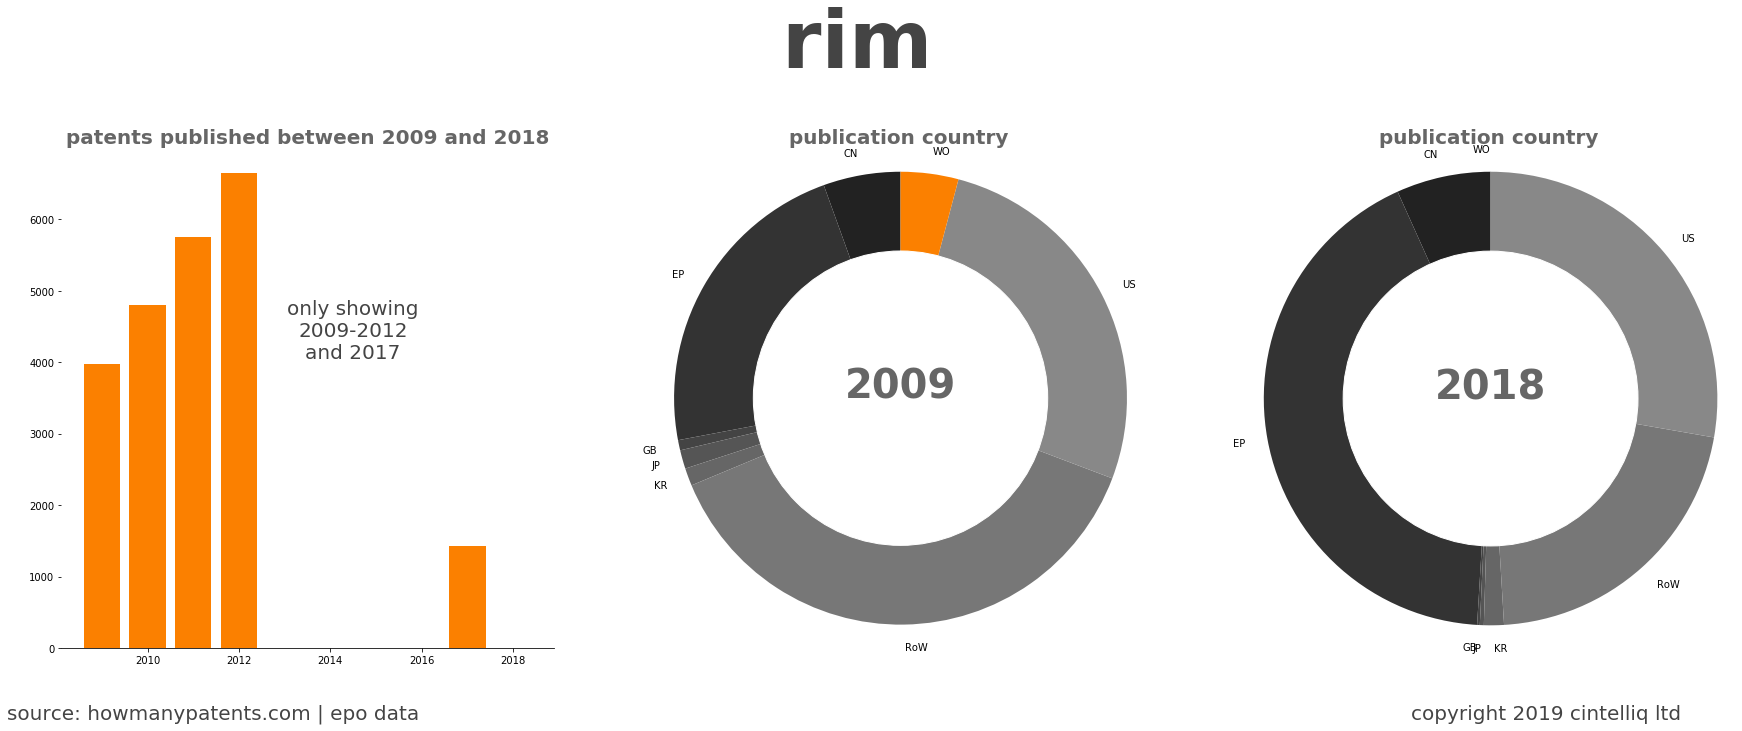 summary of patents for Rim 